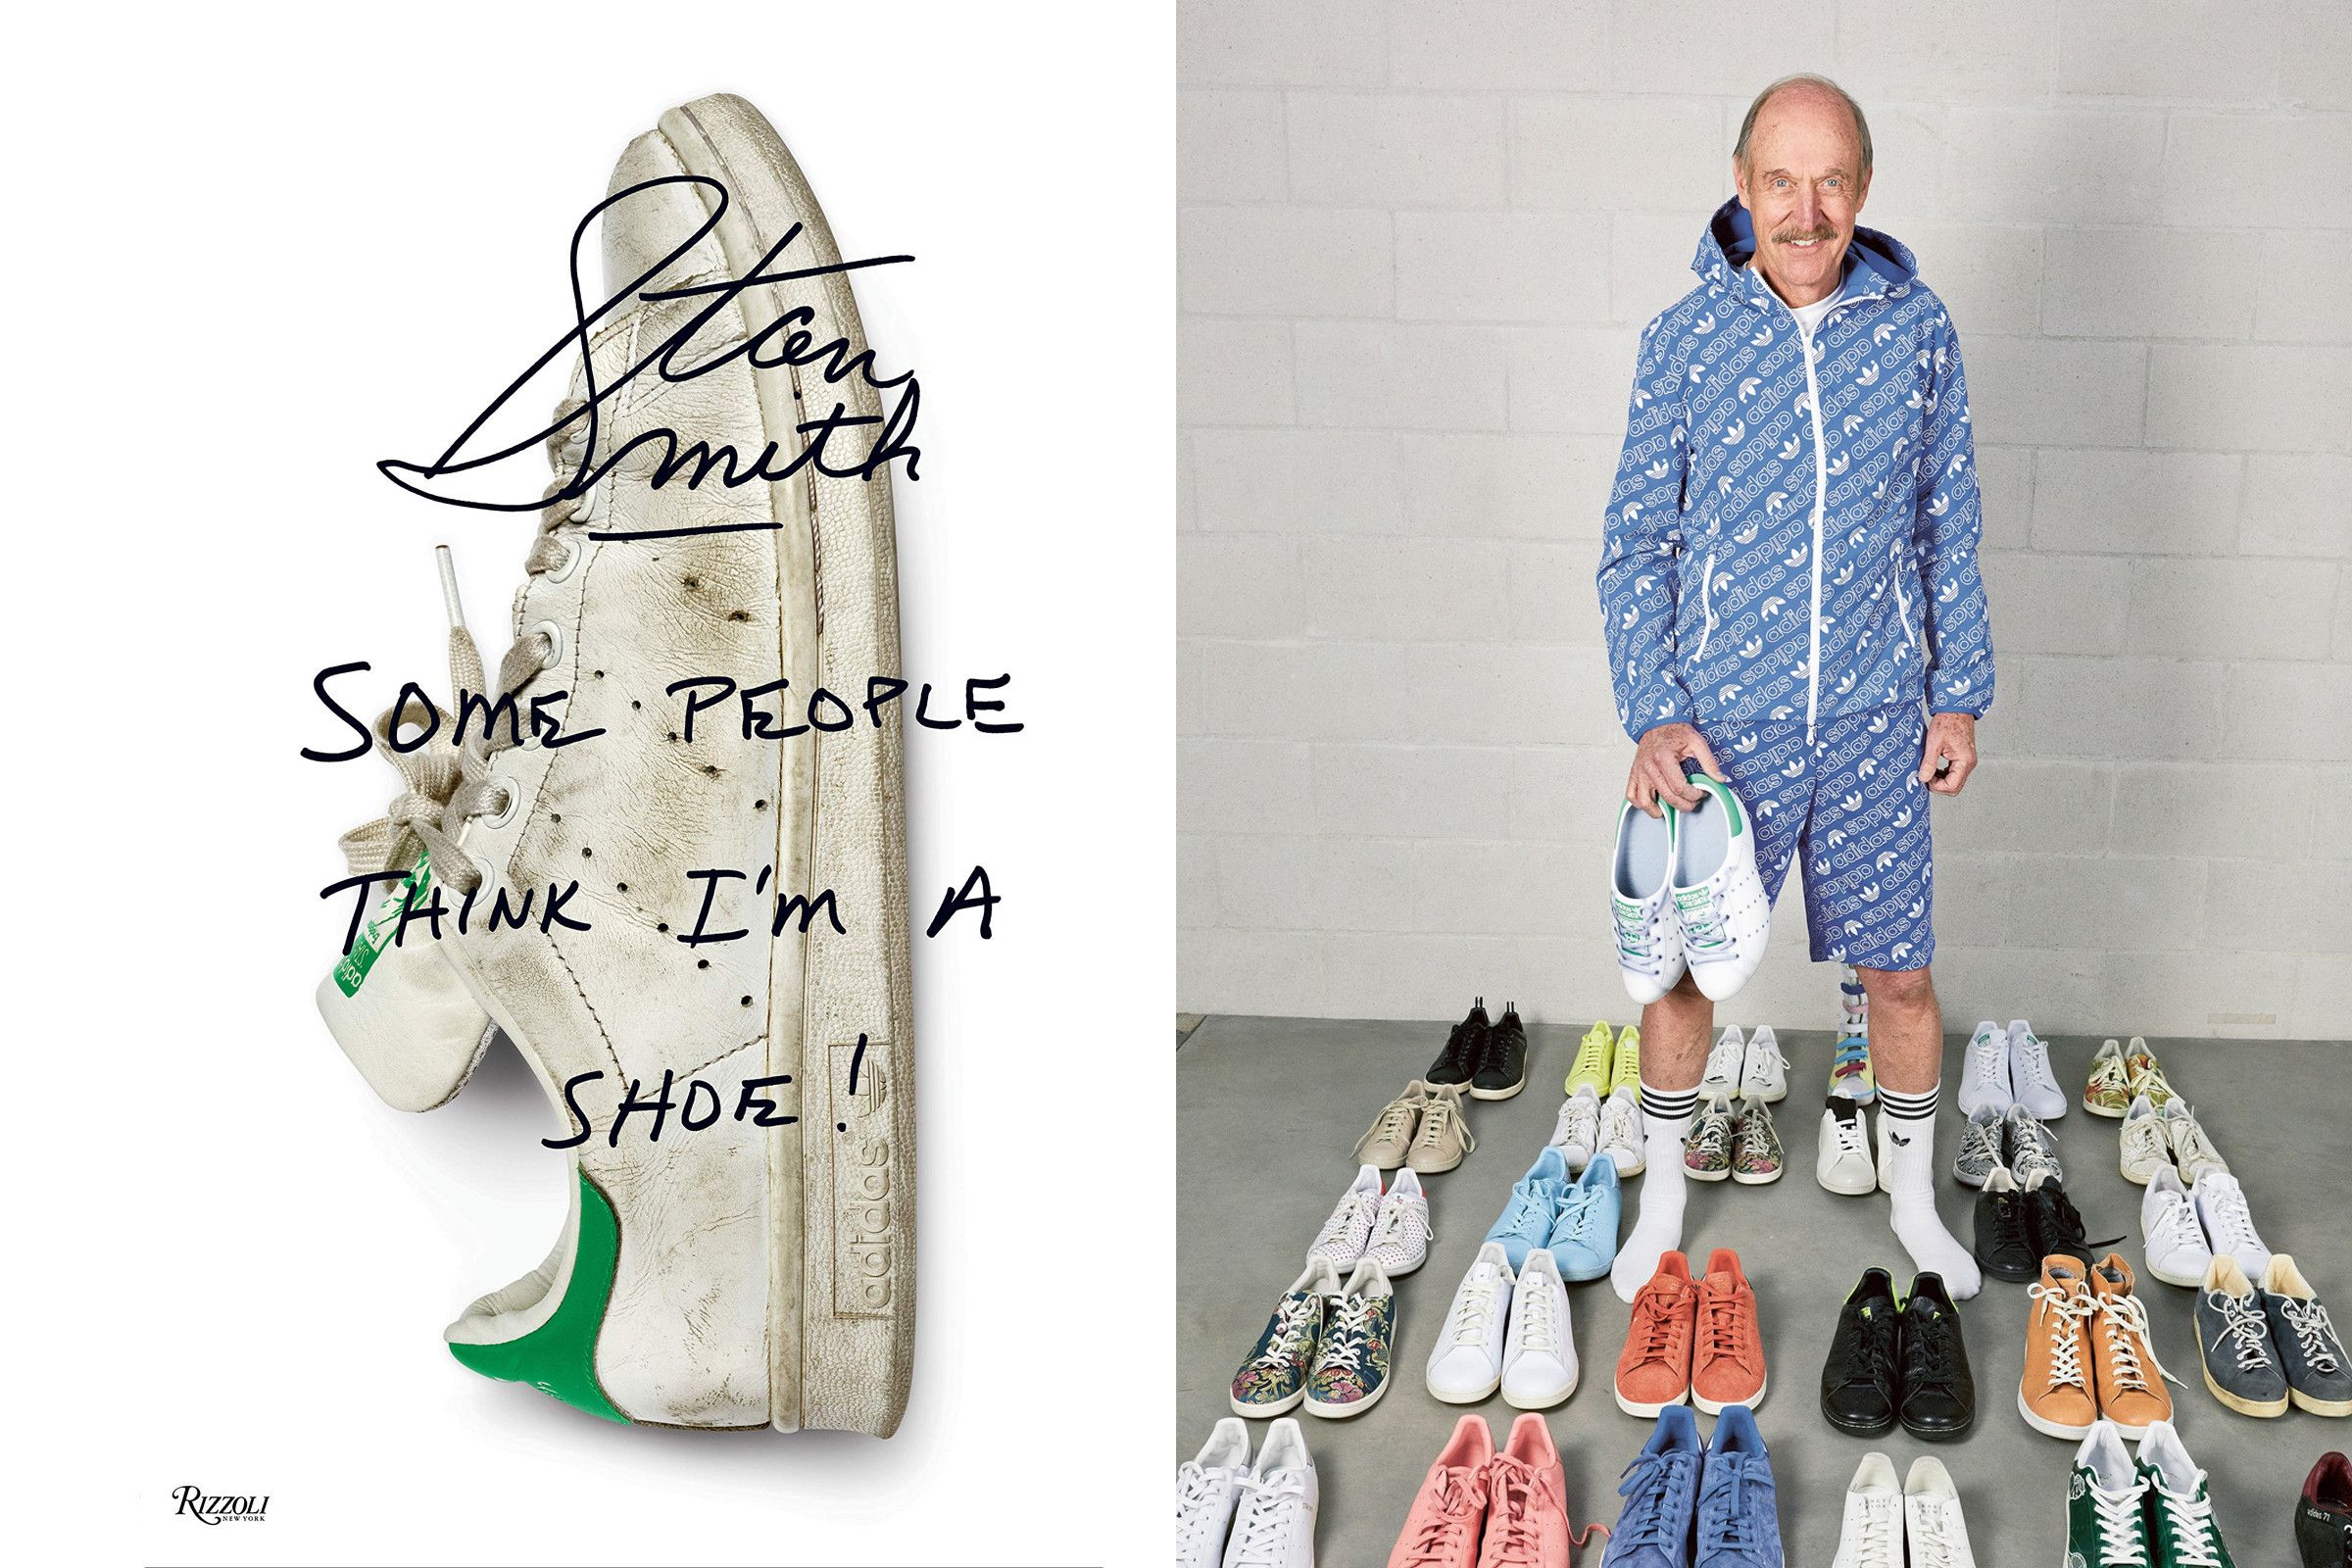 The cover of Rizzoli's Stan Smith-centric book, "Some People Think I'm a Shoe" (left) and Stan Smith (the man) with a collection of past Stan Smith releases